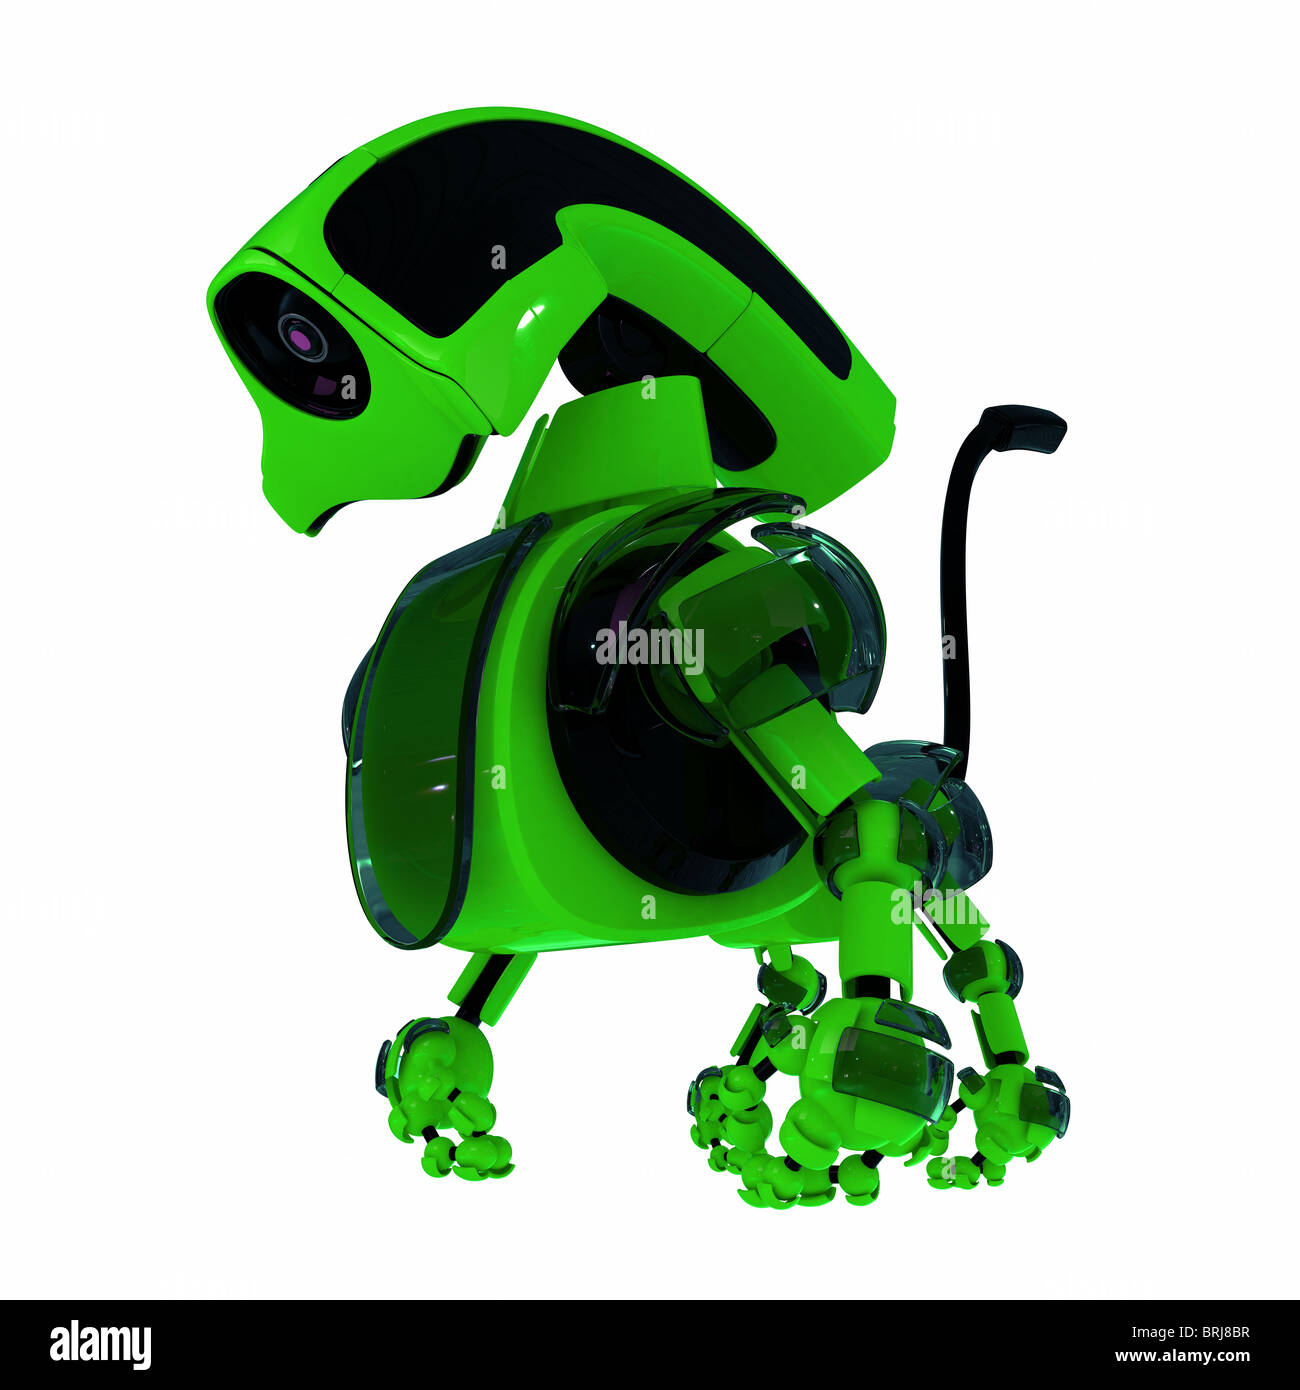 Robot dog 3d Cut Out Stock Images & Pictures - Alamy